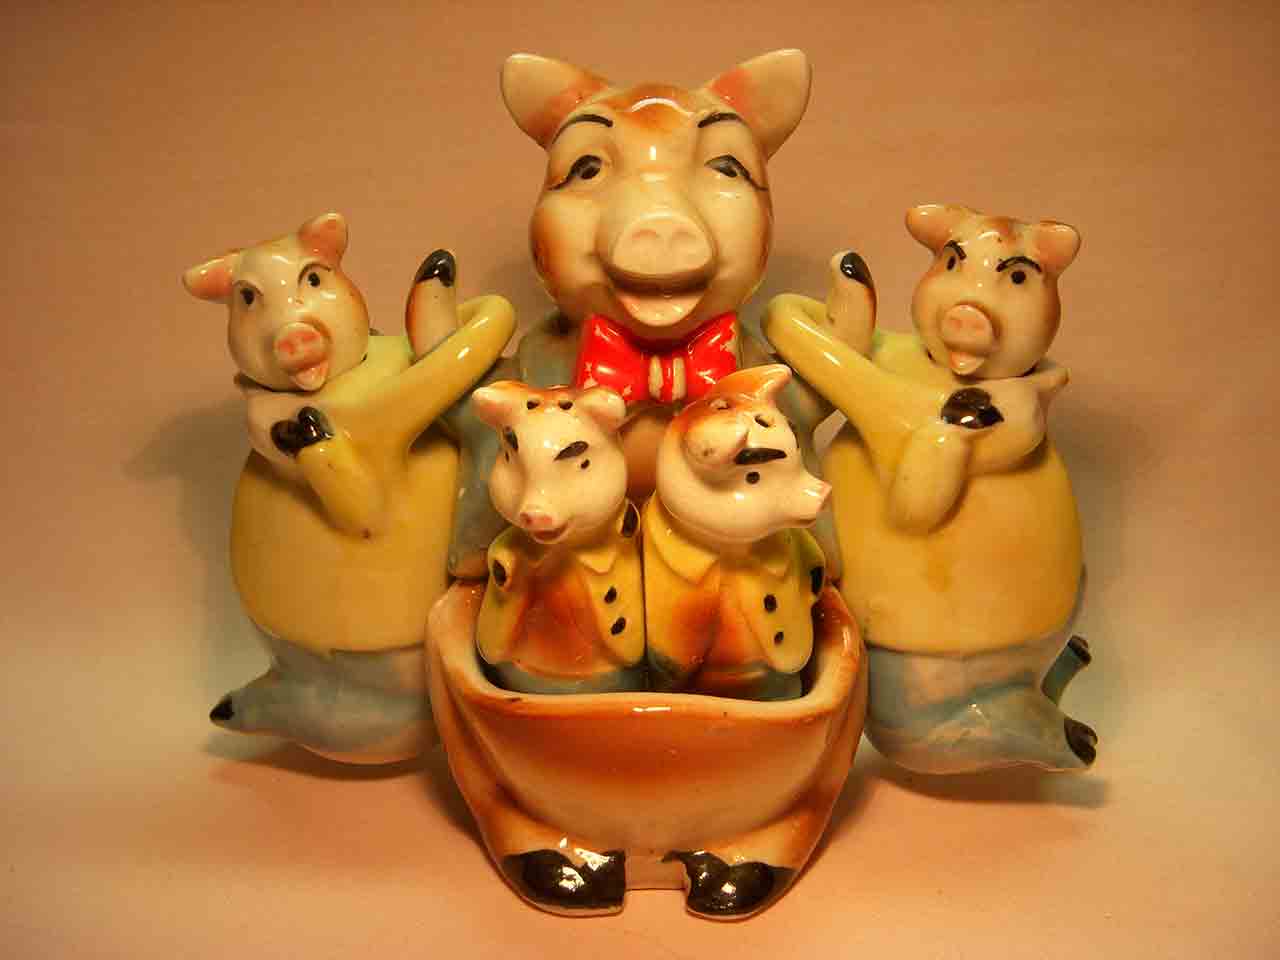 Pig family hanger salt and pepper shakers with oil and vinegar